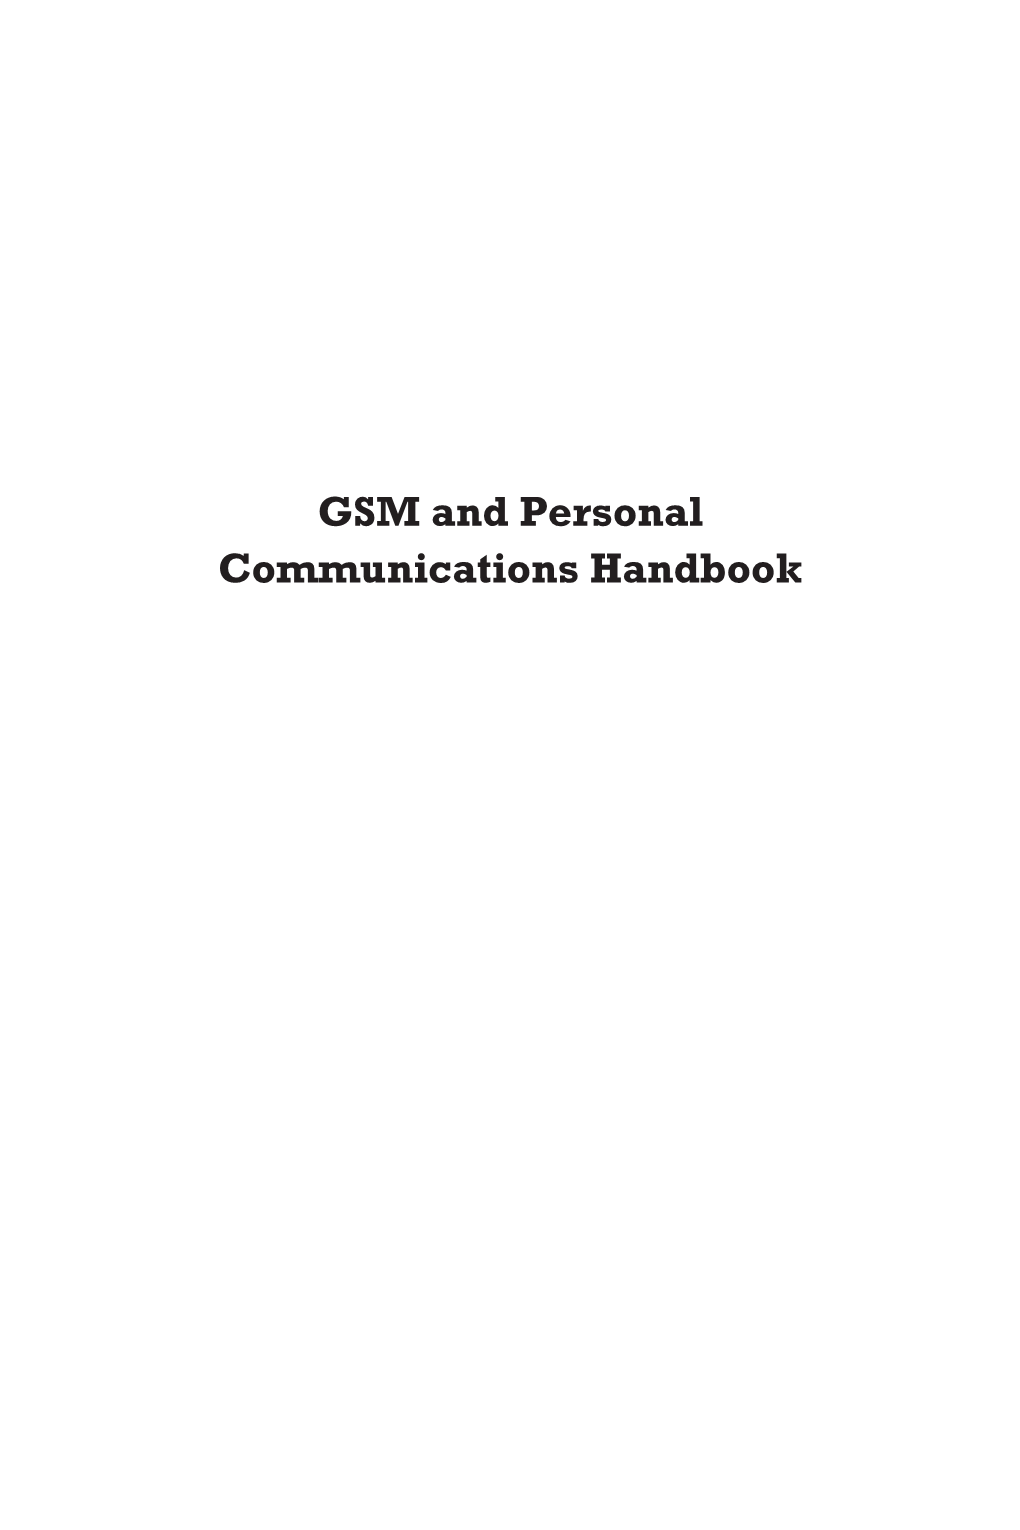 GSM and Personal Communications Handbook for a Complete Listing of the Artech House Mobile Communications Library, Turn to the Back of This Book